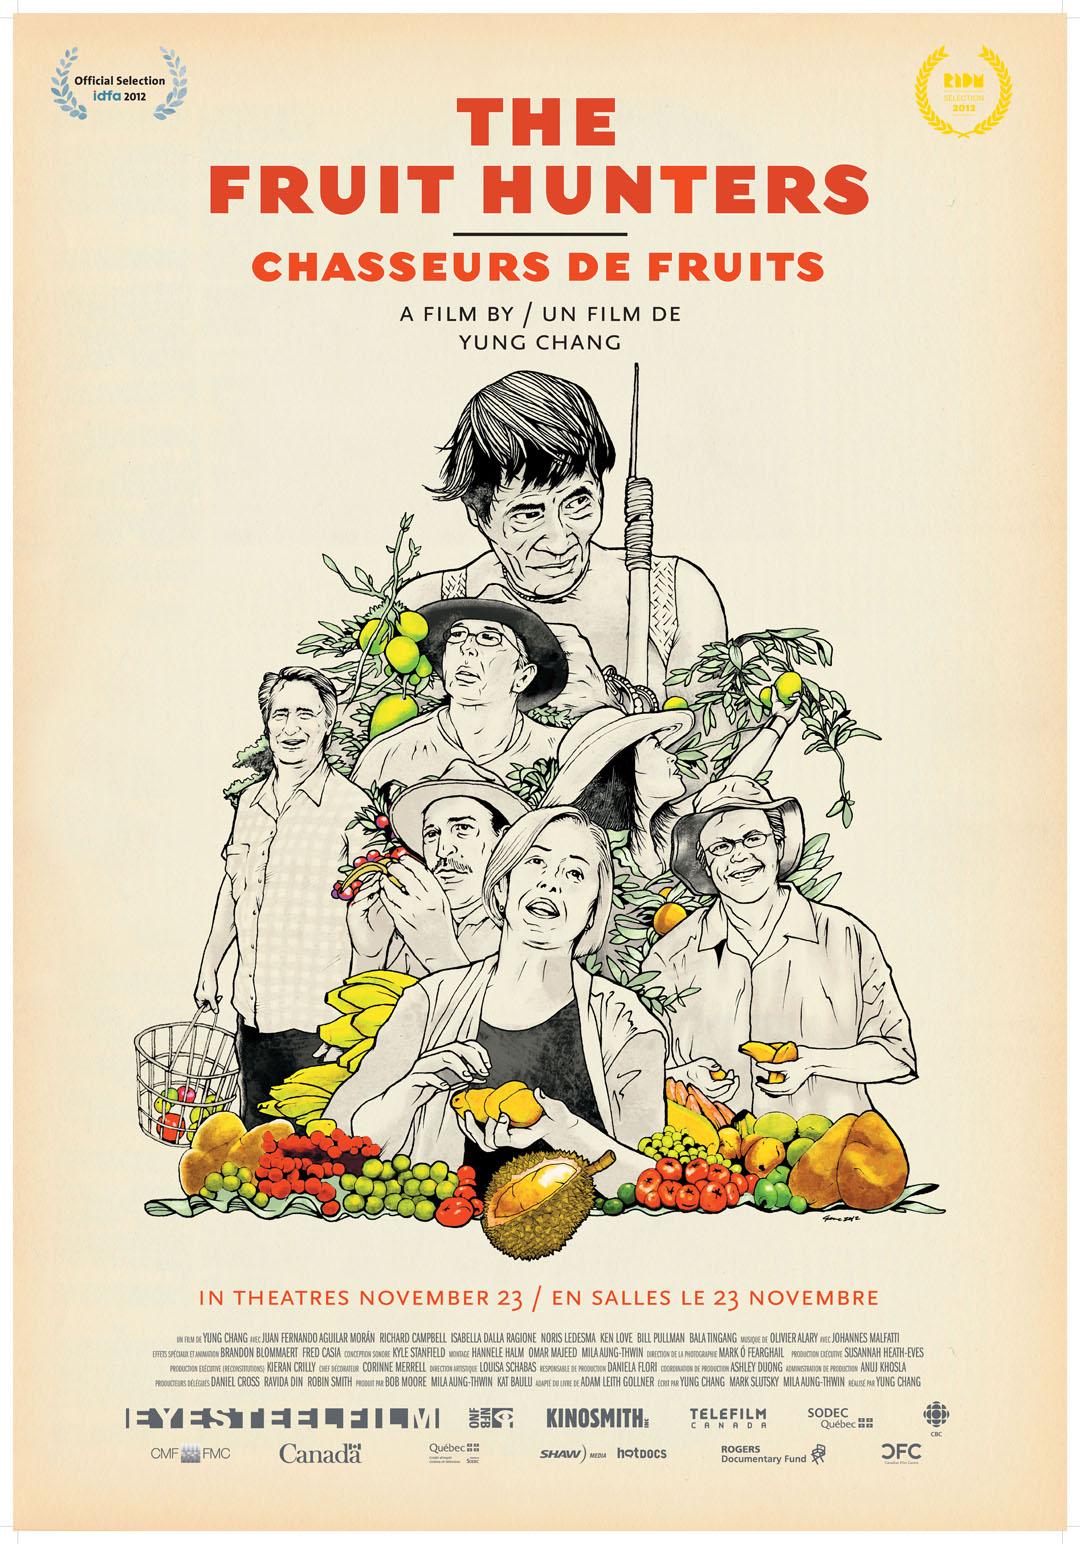 Film Poster "The Fruit Hunters"